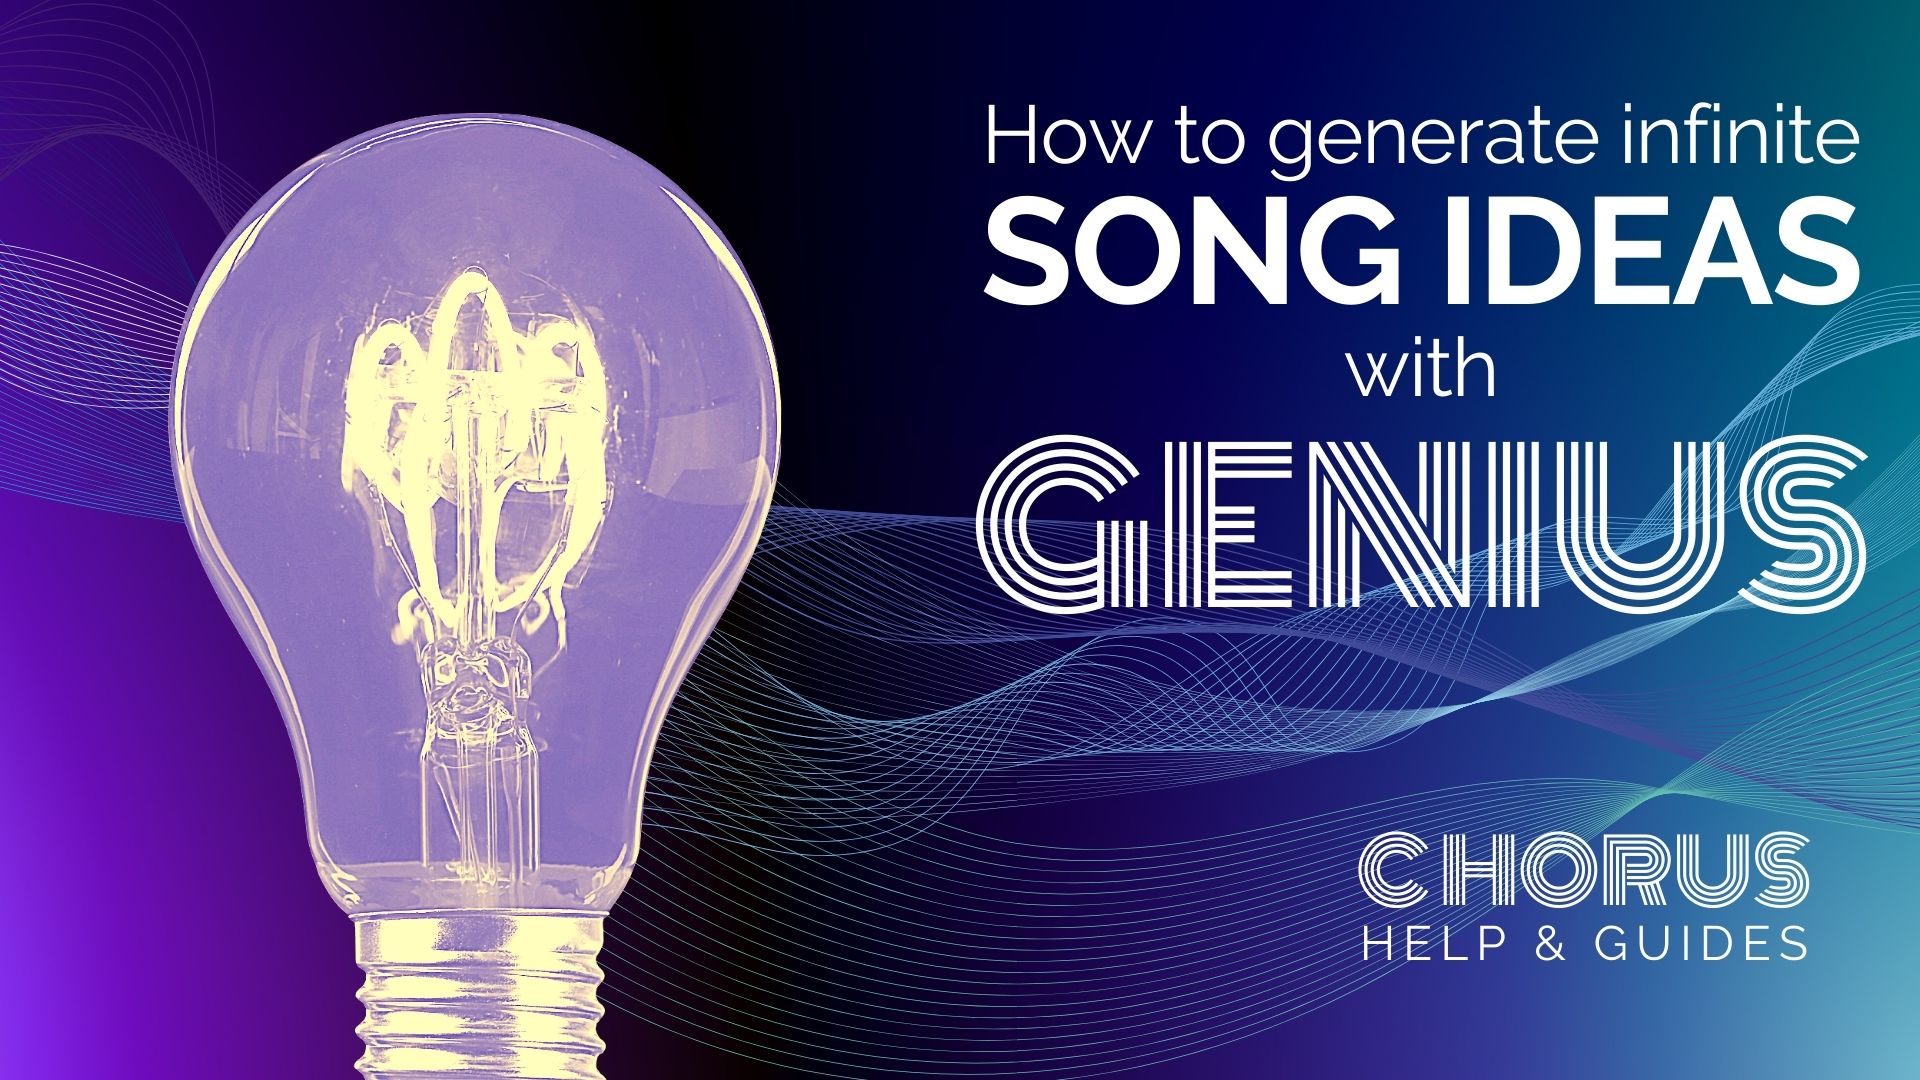 How to generate infinite song ideas in seconds with Chorus